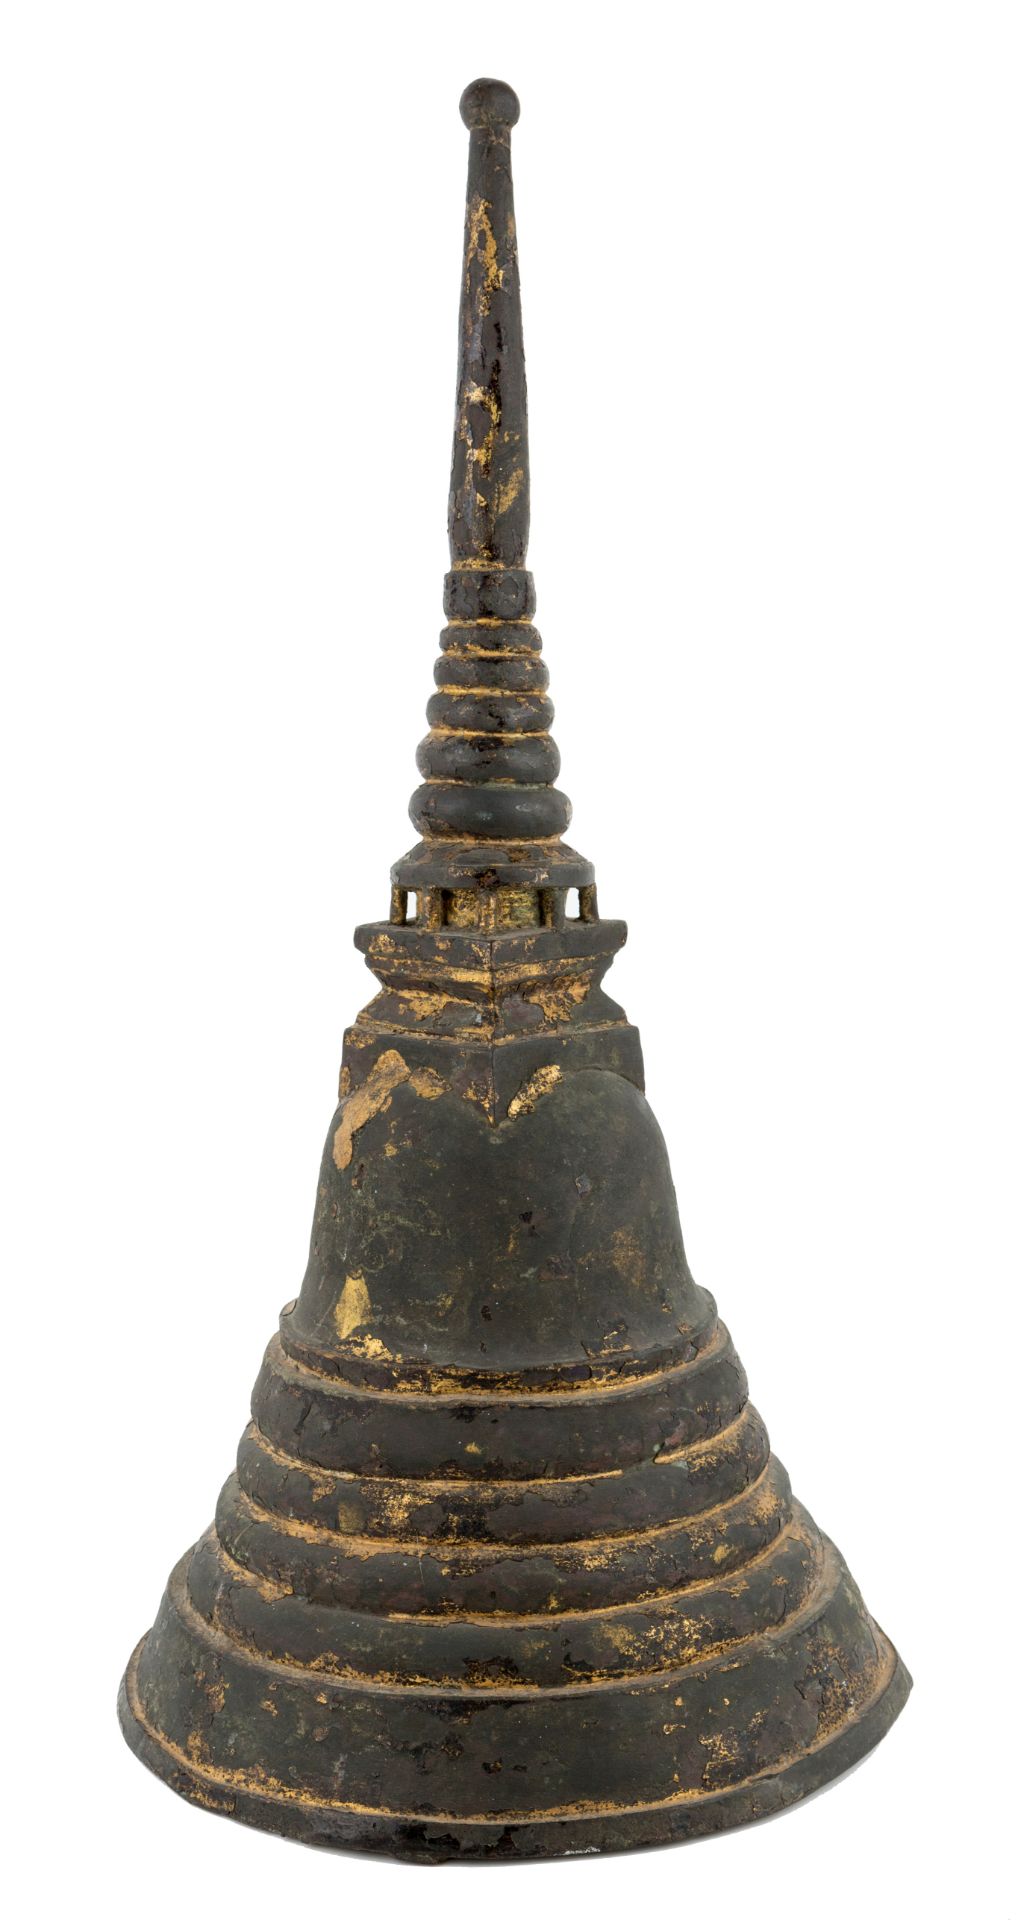 A Thai gilt lacquered bronze stupa, 18th century, of a round bell-shaped form, incorporating colu...